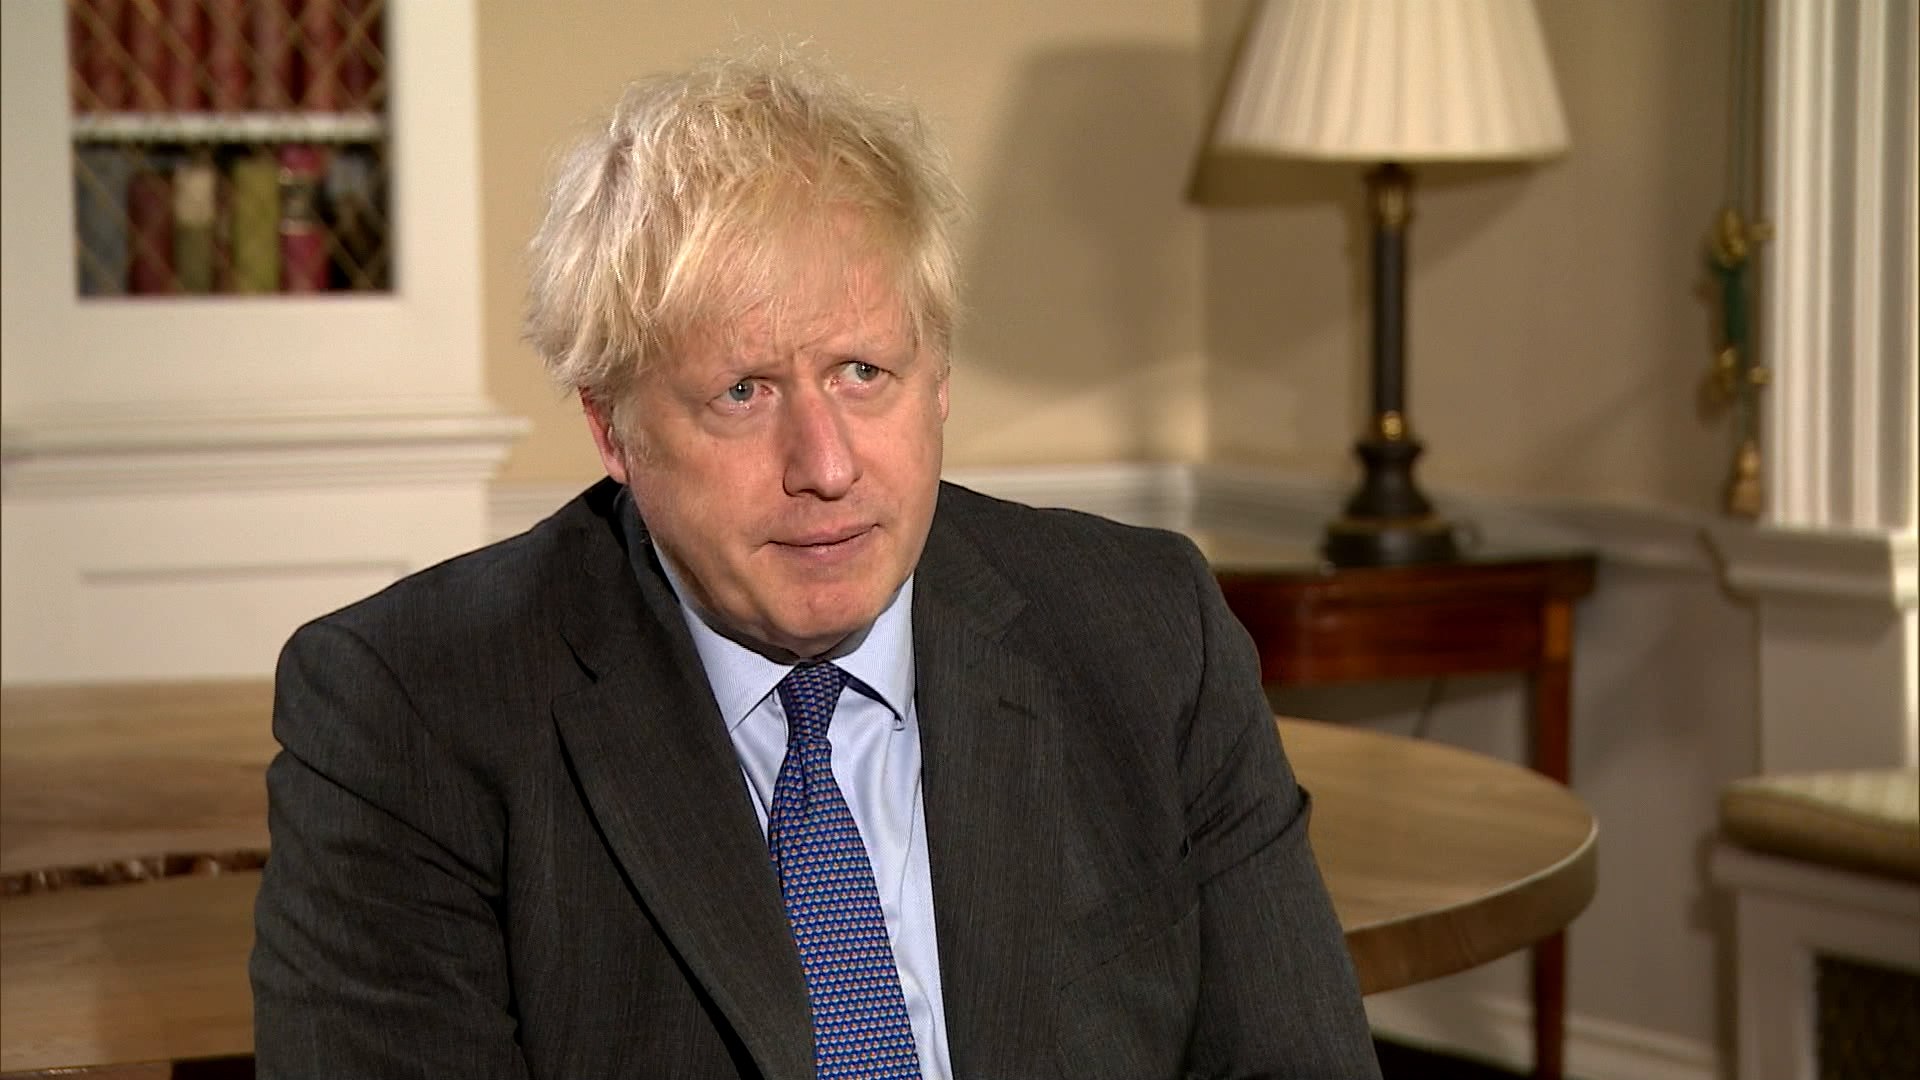 Boris Johnson denies saying he would rather see 'bodies pile high' than impose a third lockdown.